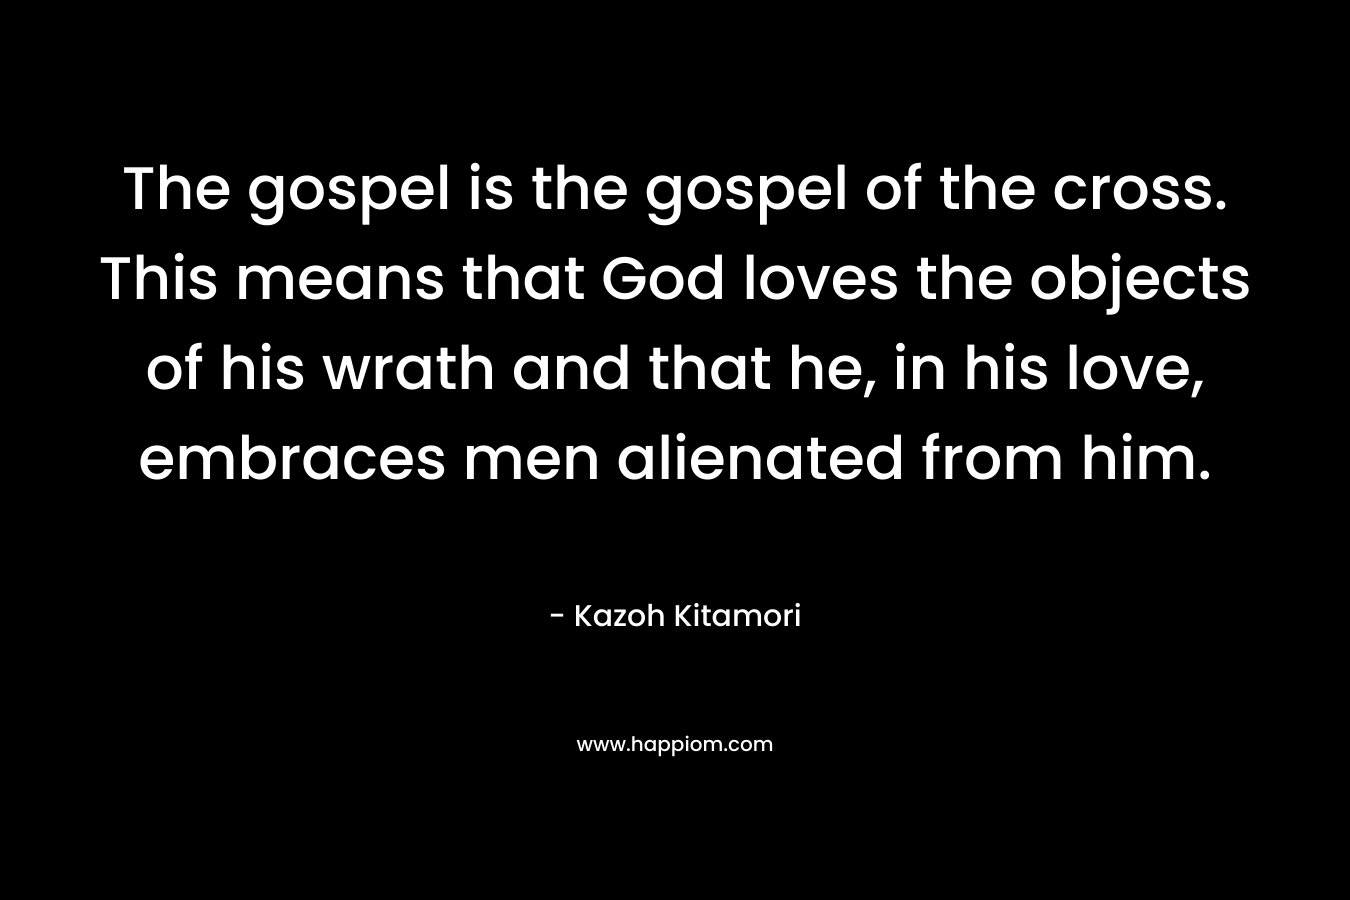 The gospel is the gospel of the cross. This means that God loves the objects of his wrath and that he, in his love, embraces men alienated from him.